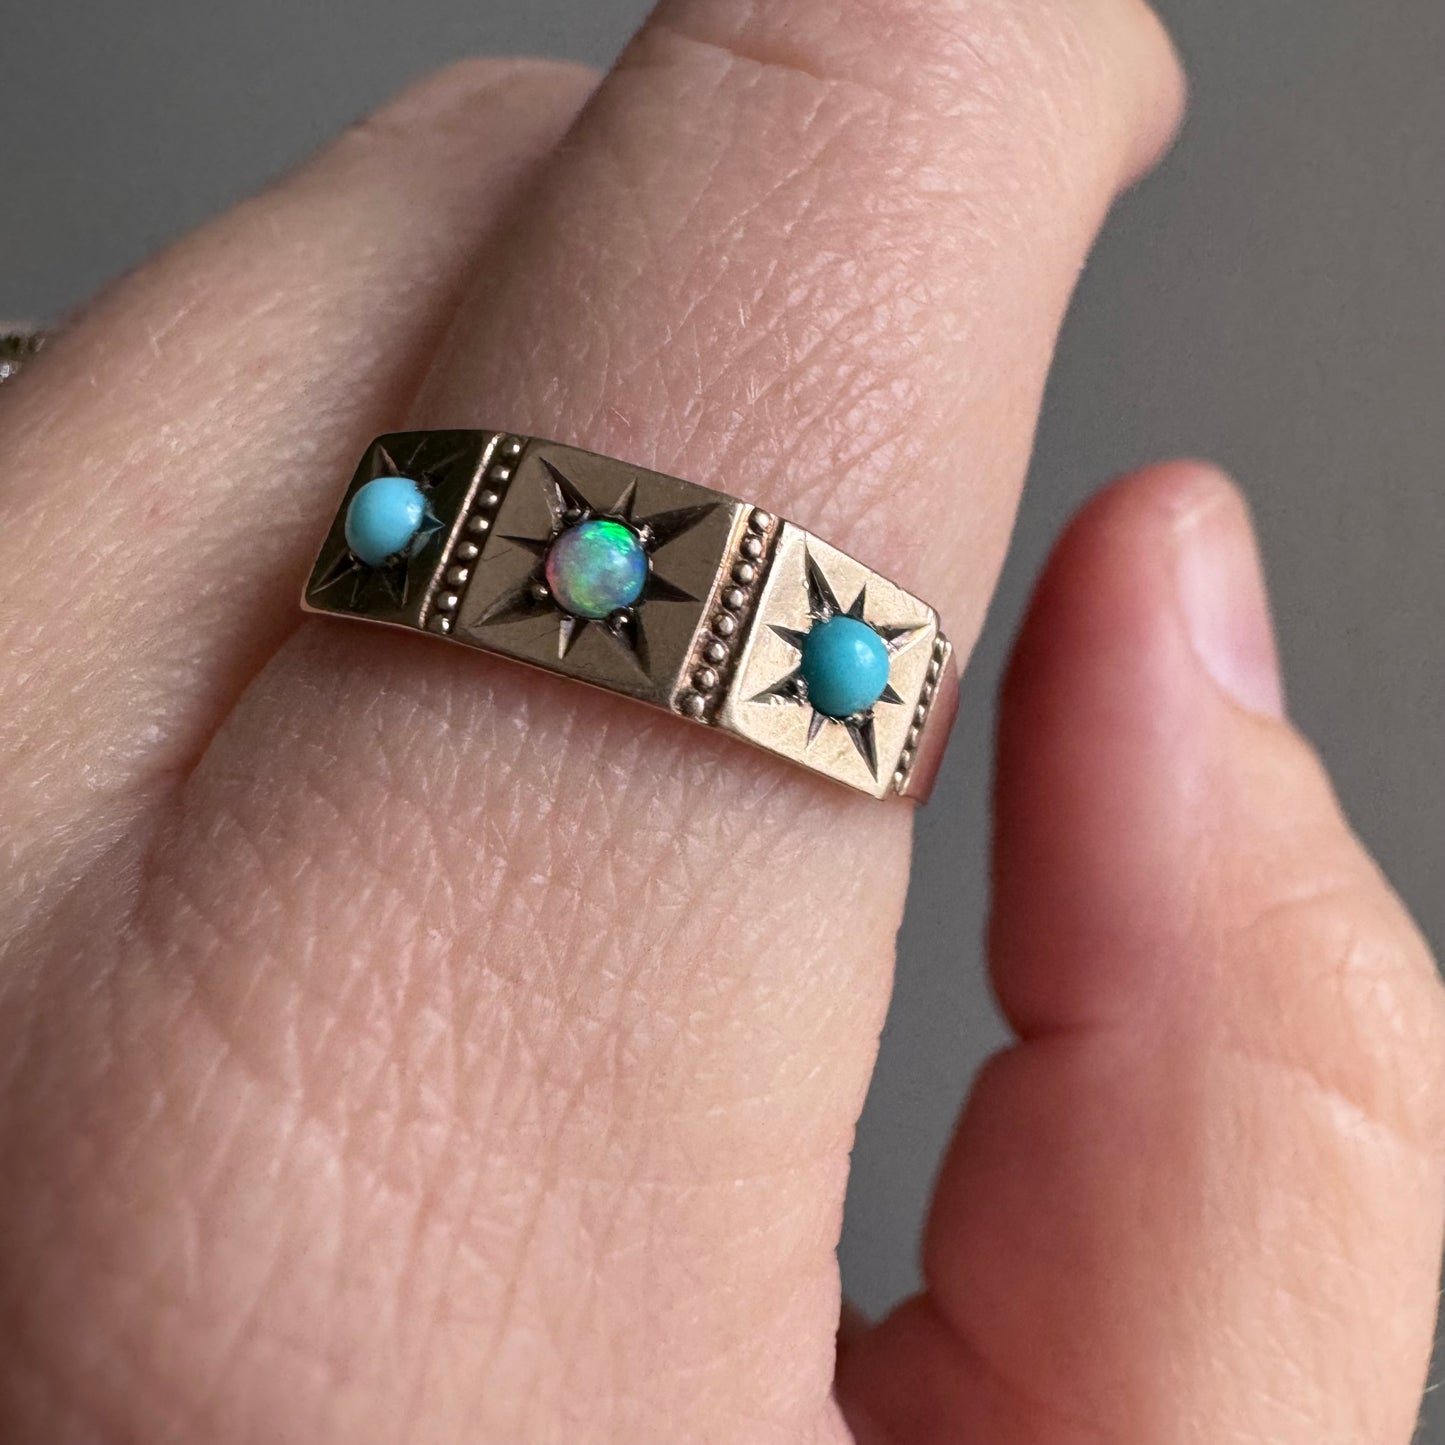 reimagined A N T I Q U E // 10k rosy yellow gold starburst trilogy band with opal and turquoise / size 7.75